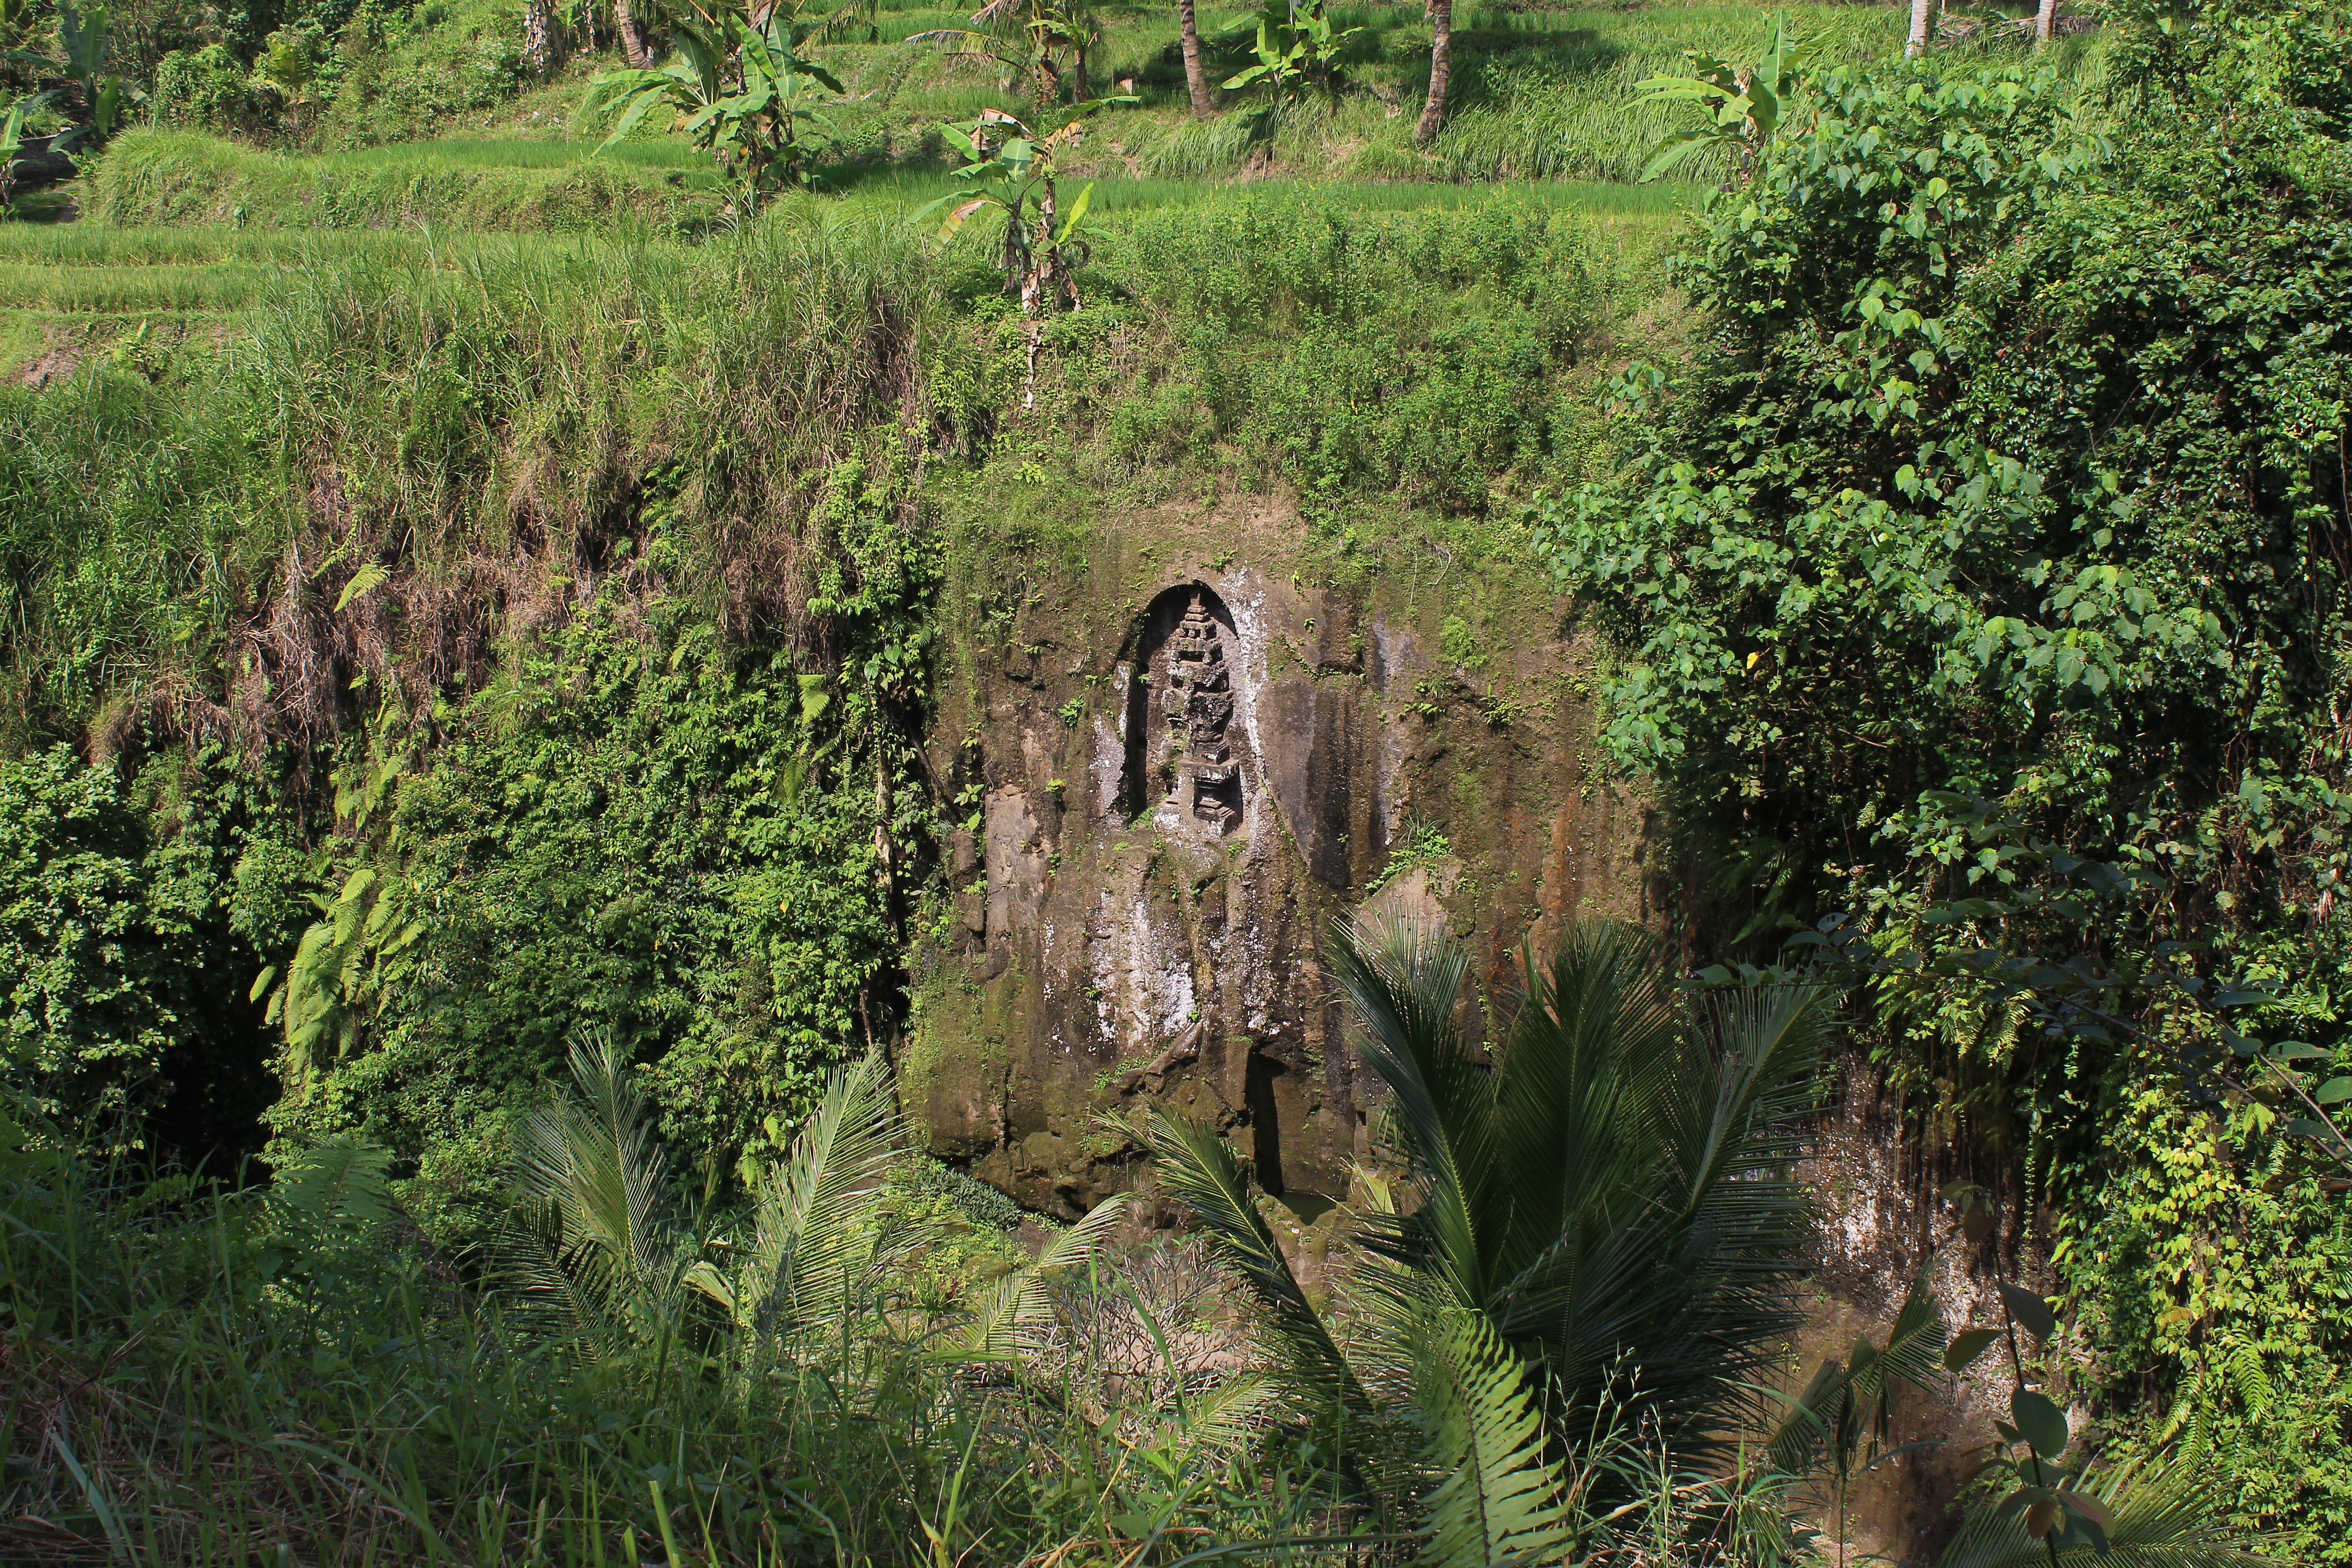 Small rock-cut shrine in the river ravine, with rice paddies along the upper bank